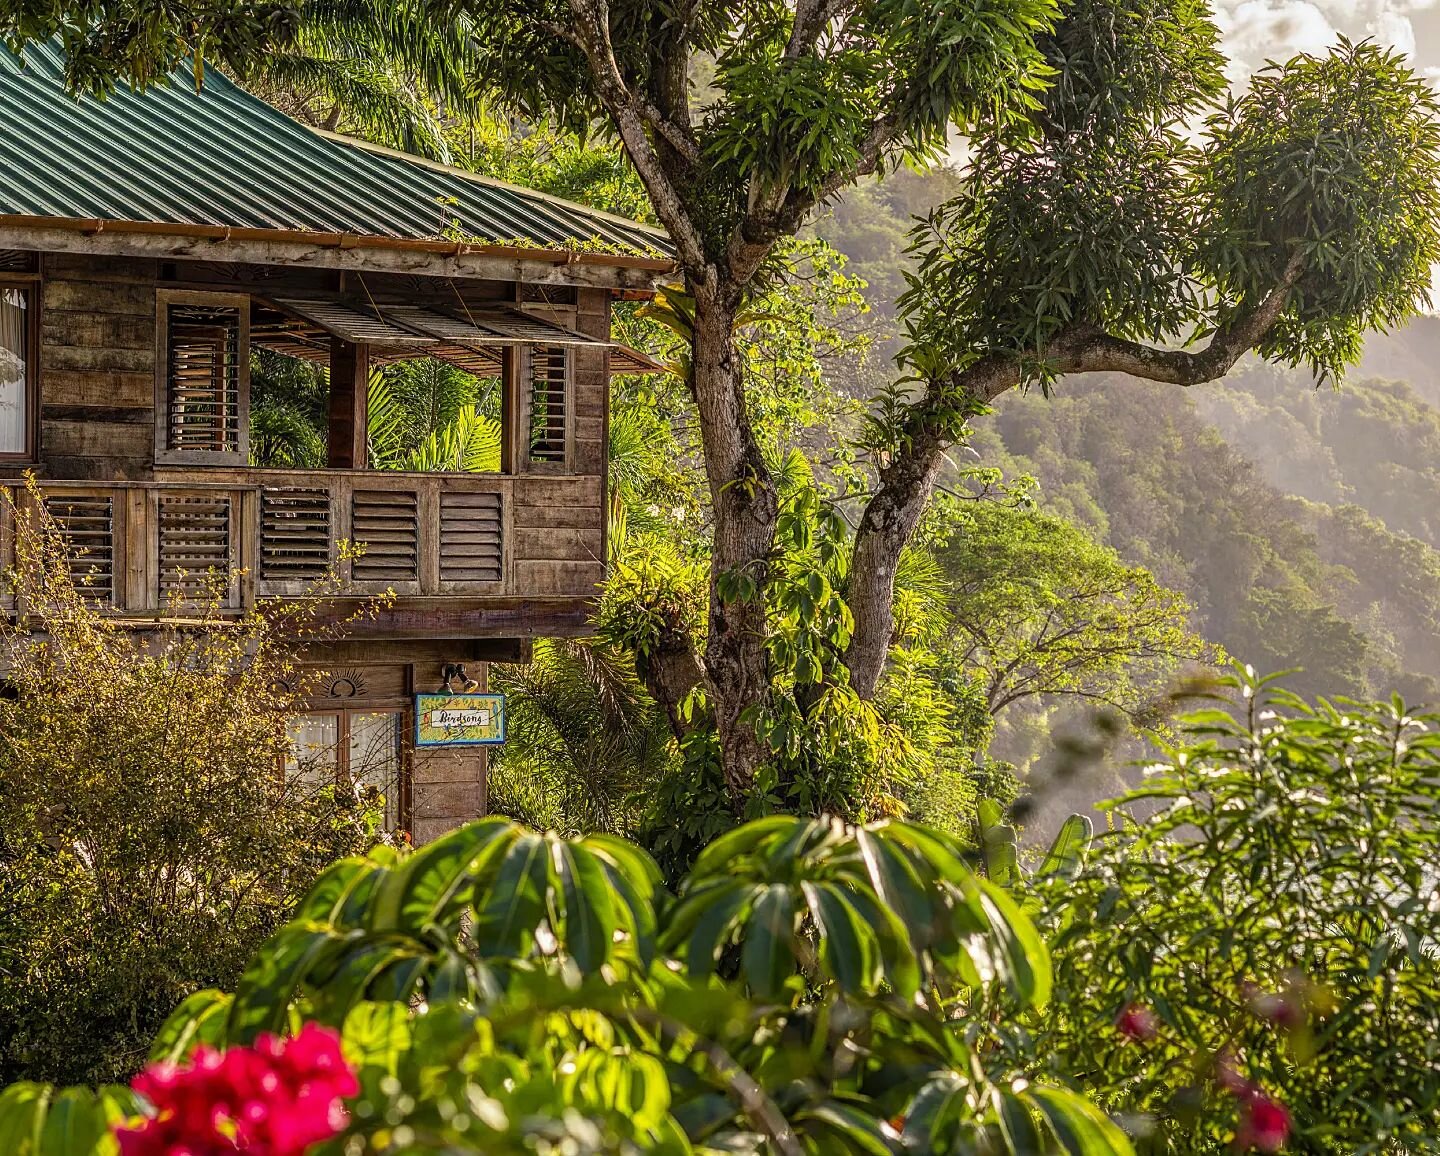 Tumbling down lush hillside on Tobago's sleepy west coast, above a half-moon sandy bay, lies the charming @castararetreats....No five star bling here but a quieter type of luxury, defined by nature, tranquility &amp; an authentic taste of Tobago. 

H